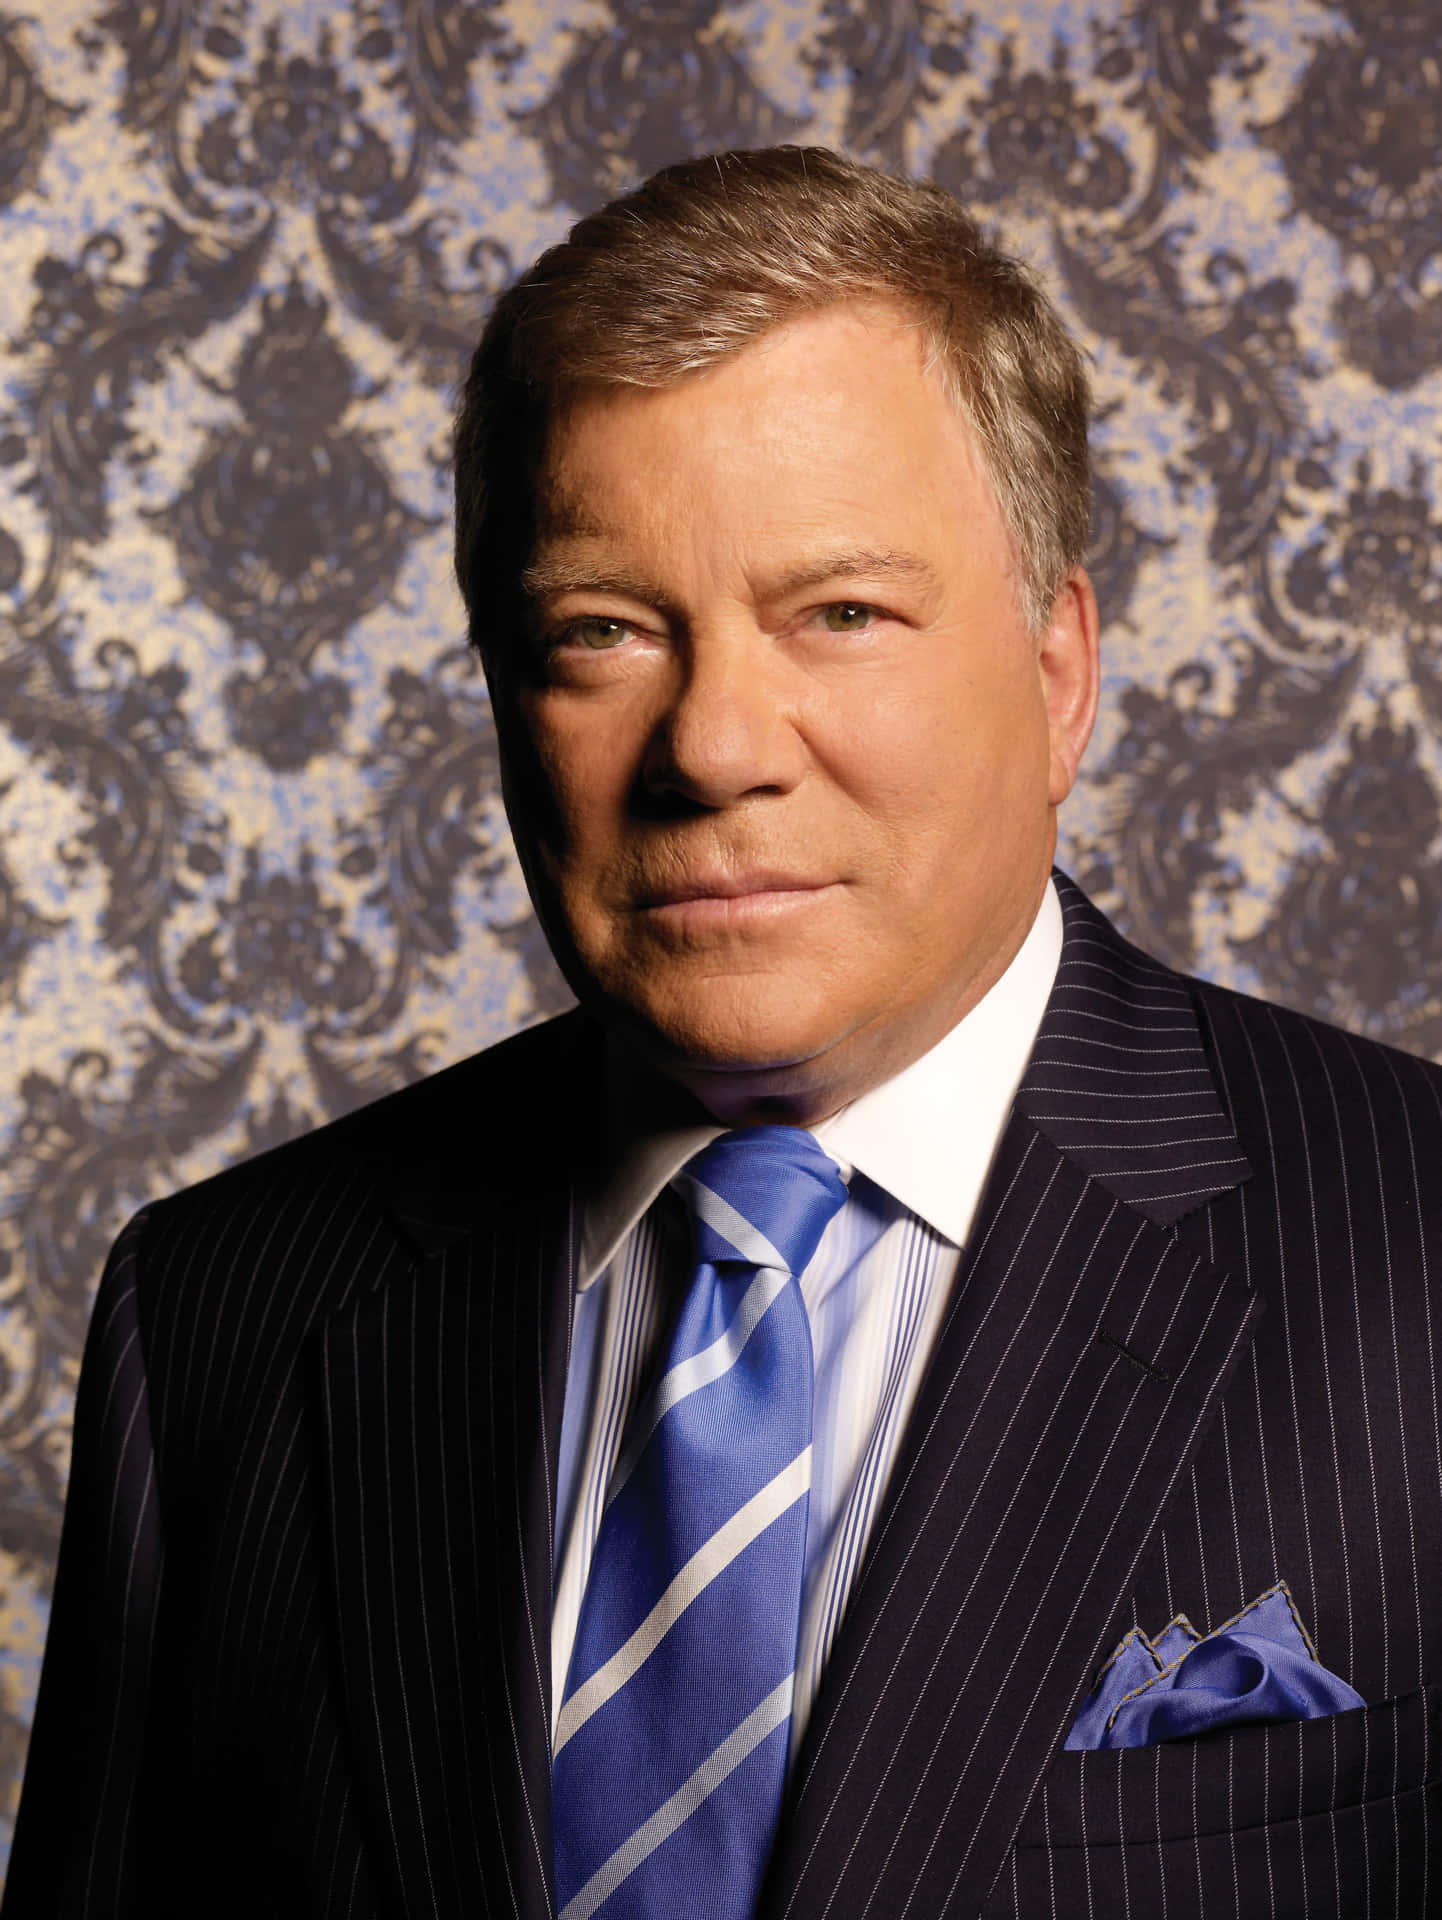 William Shatner Poses for a Professional Portrait Wallpaper